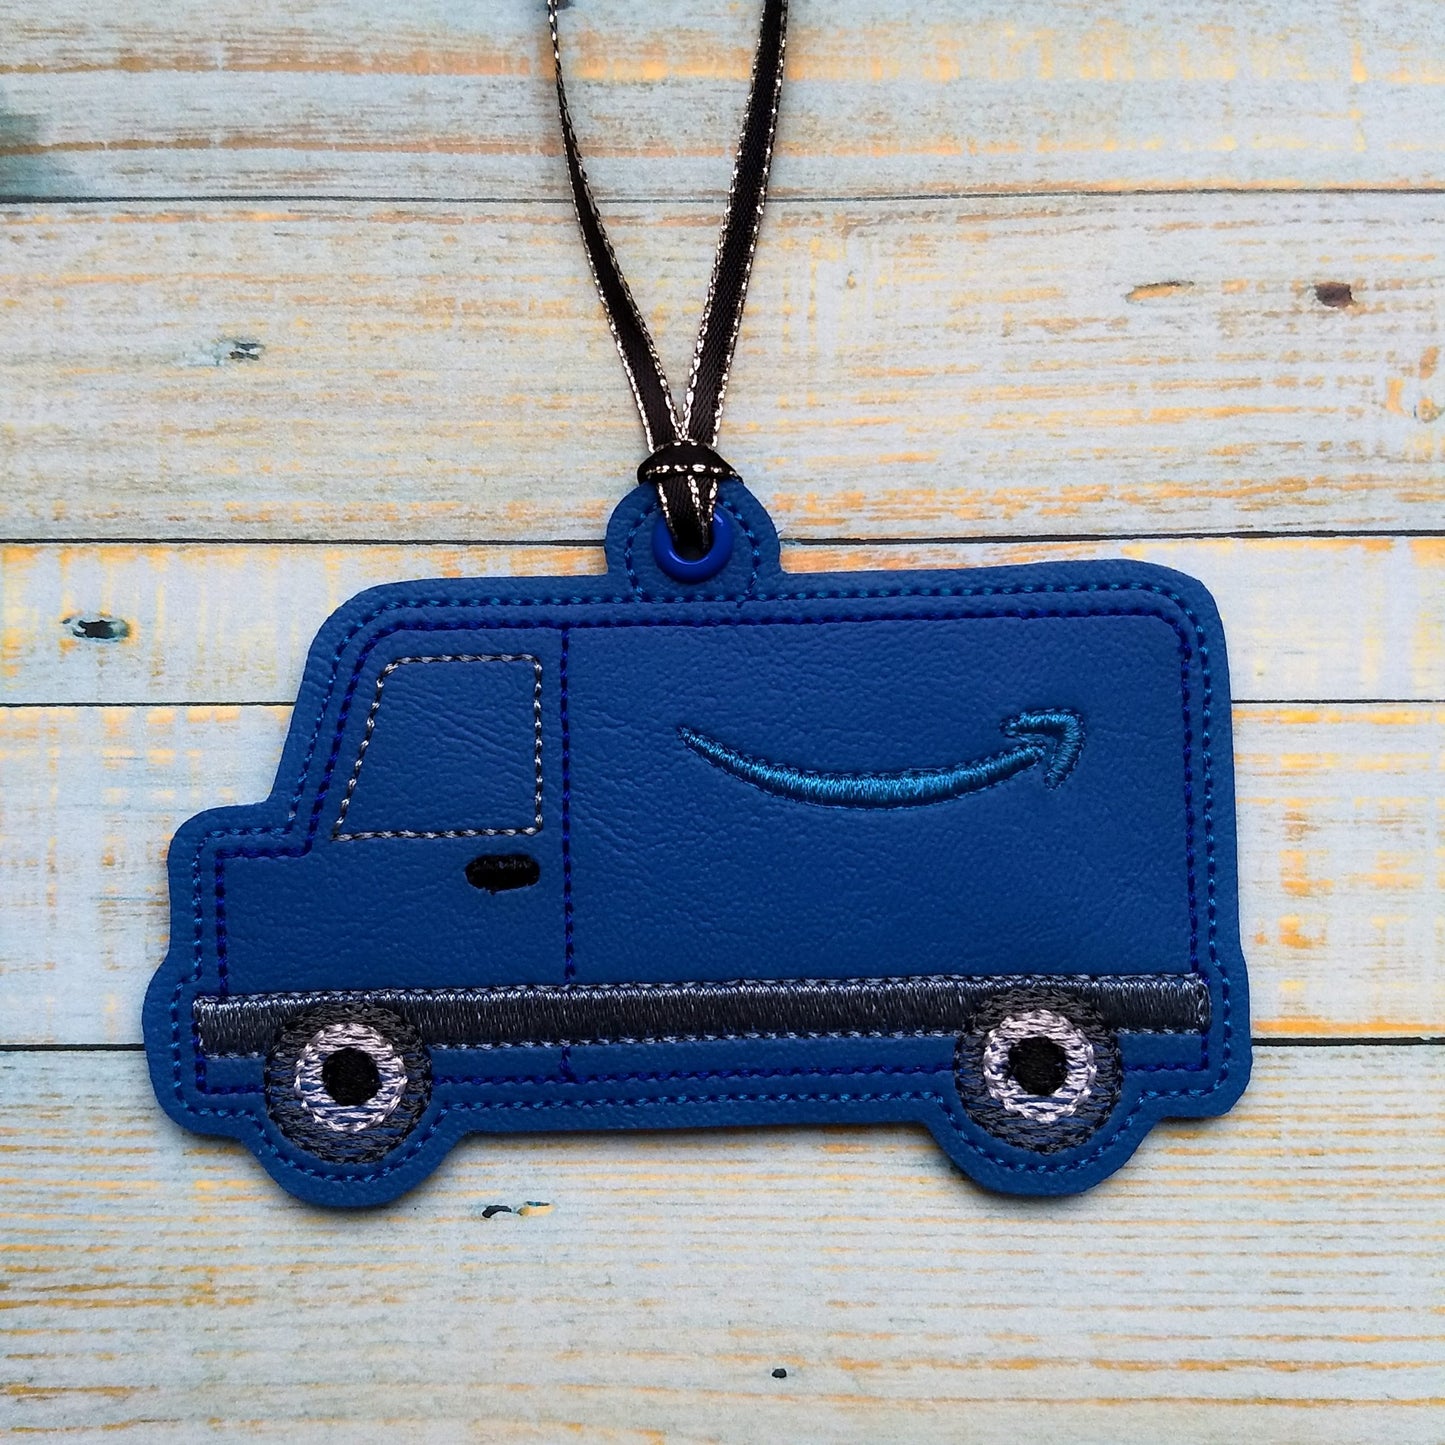 Blue Delivery Truck Ornament - Digital Embroidery Design